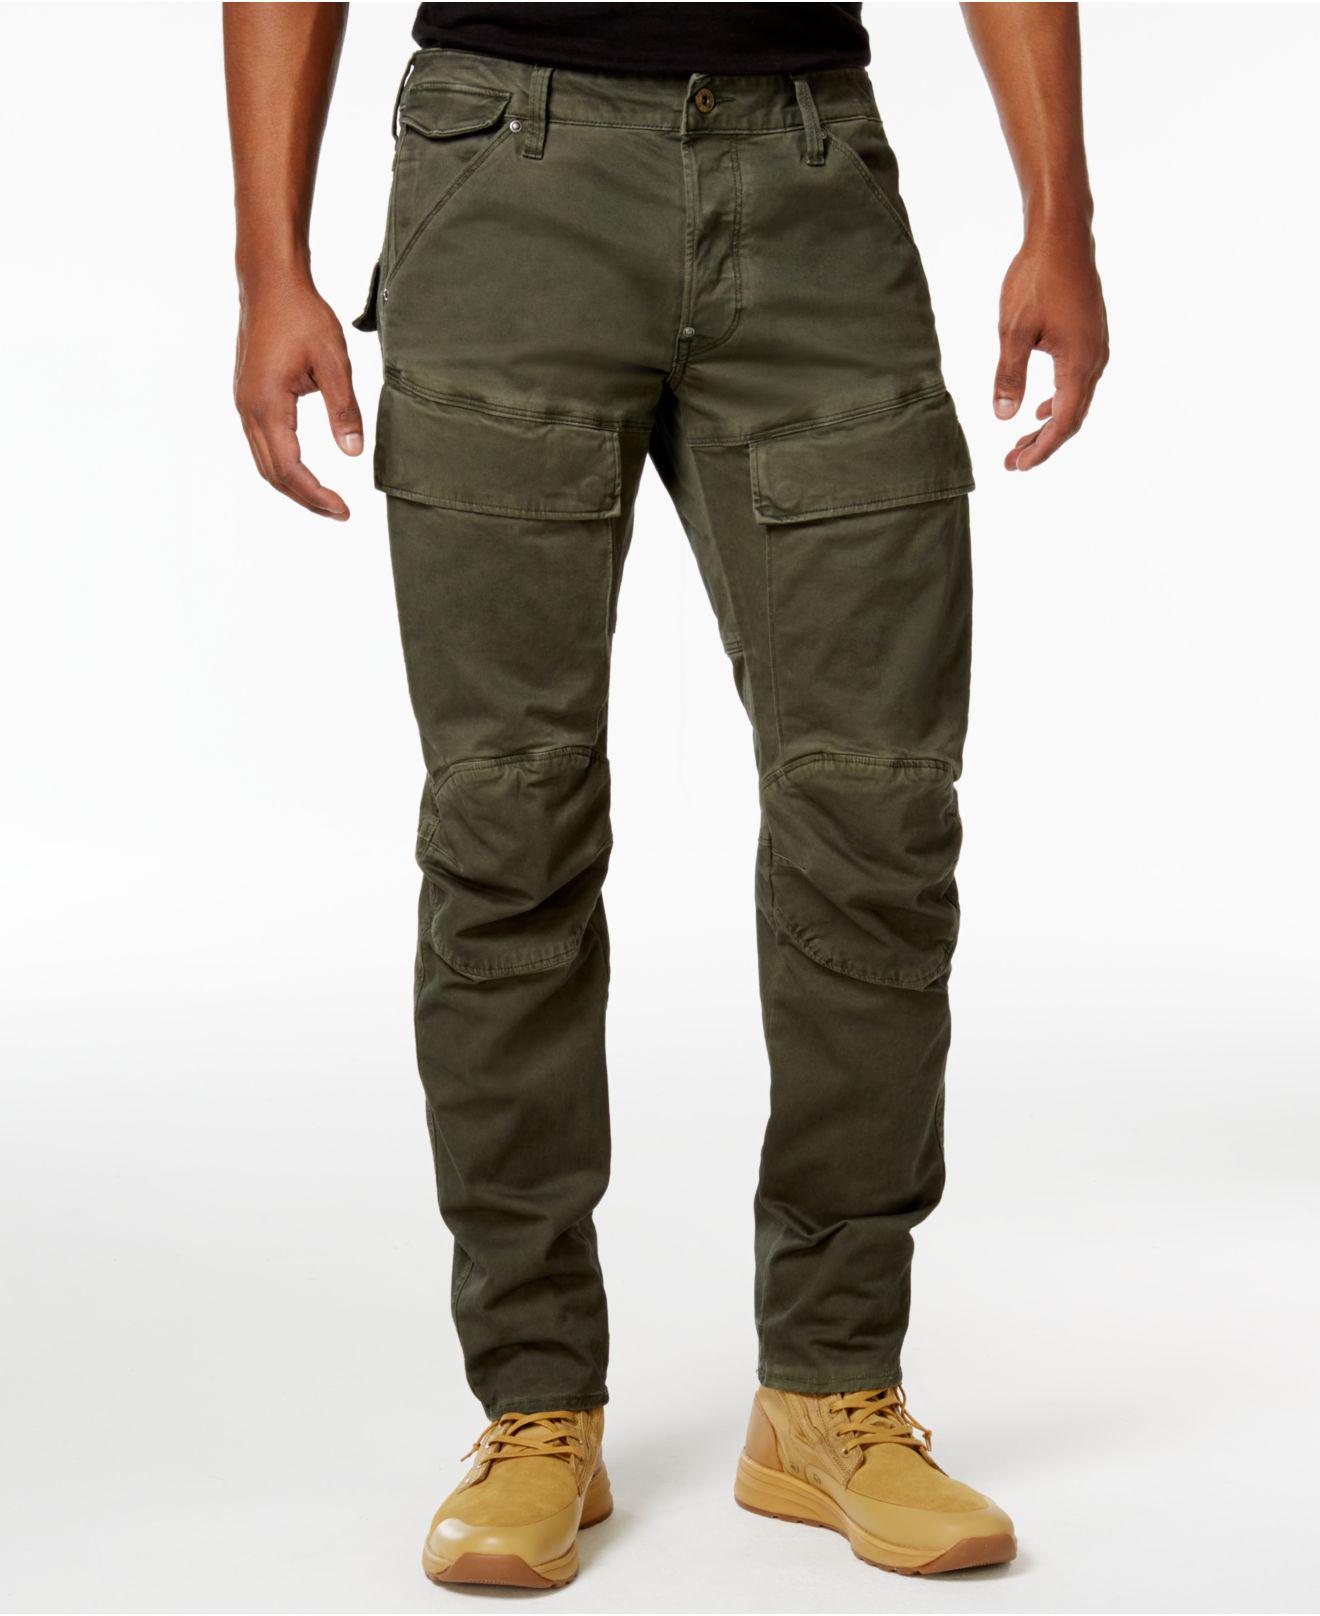 G-Star RAW Cotton Men's 5620 Air Defense 3d Slim-fit Cargo Pants in ...